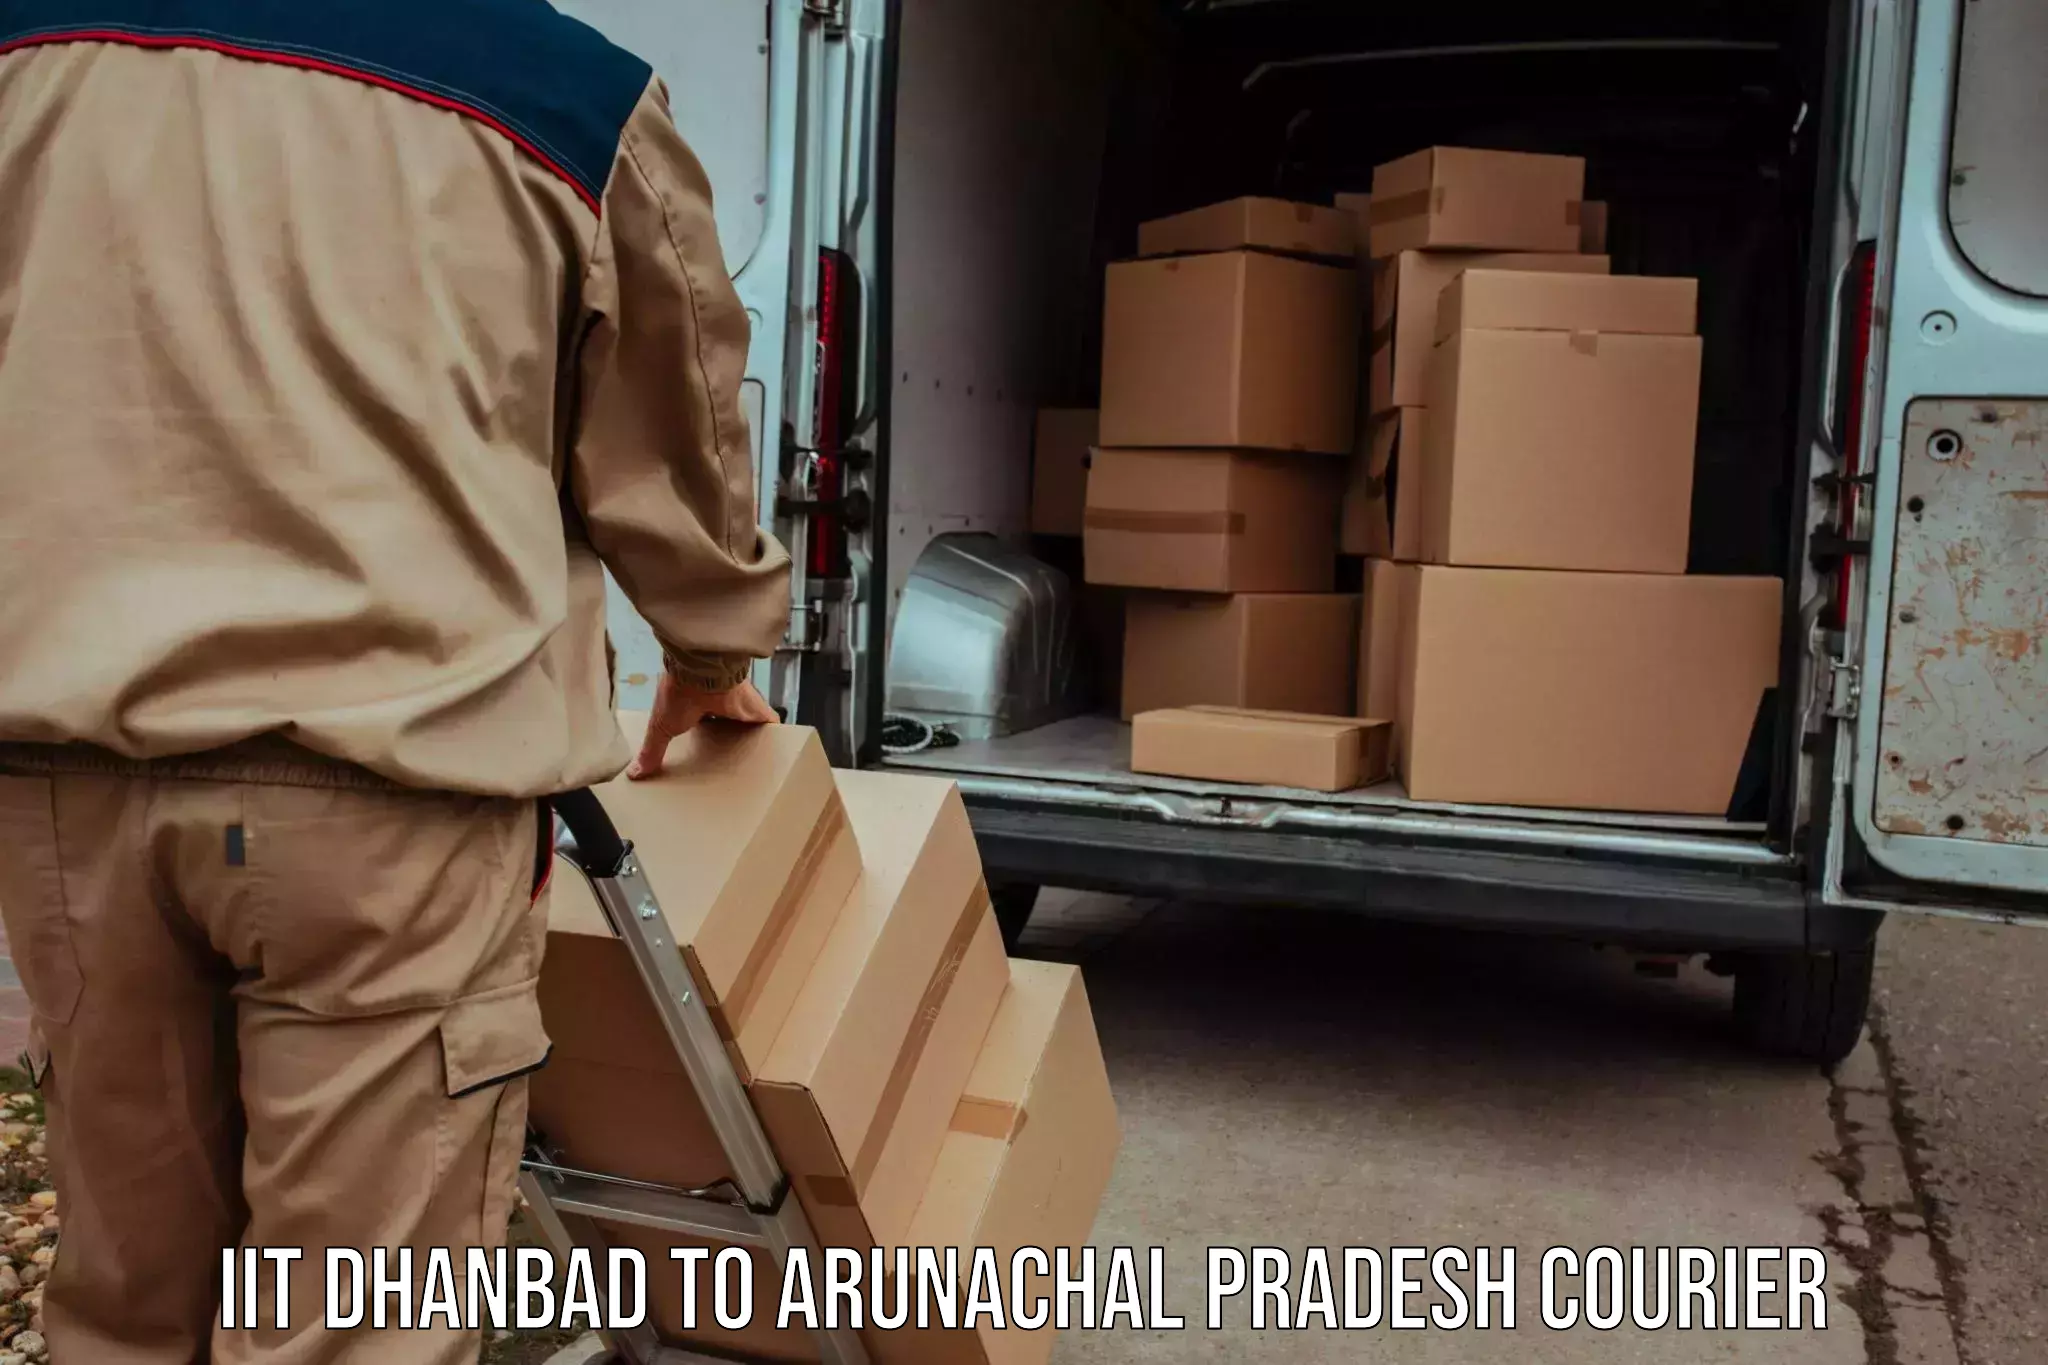 Secure freight services IIT Dhanbad to Bomdila